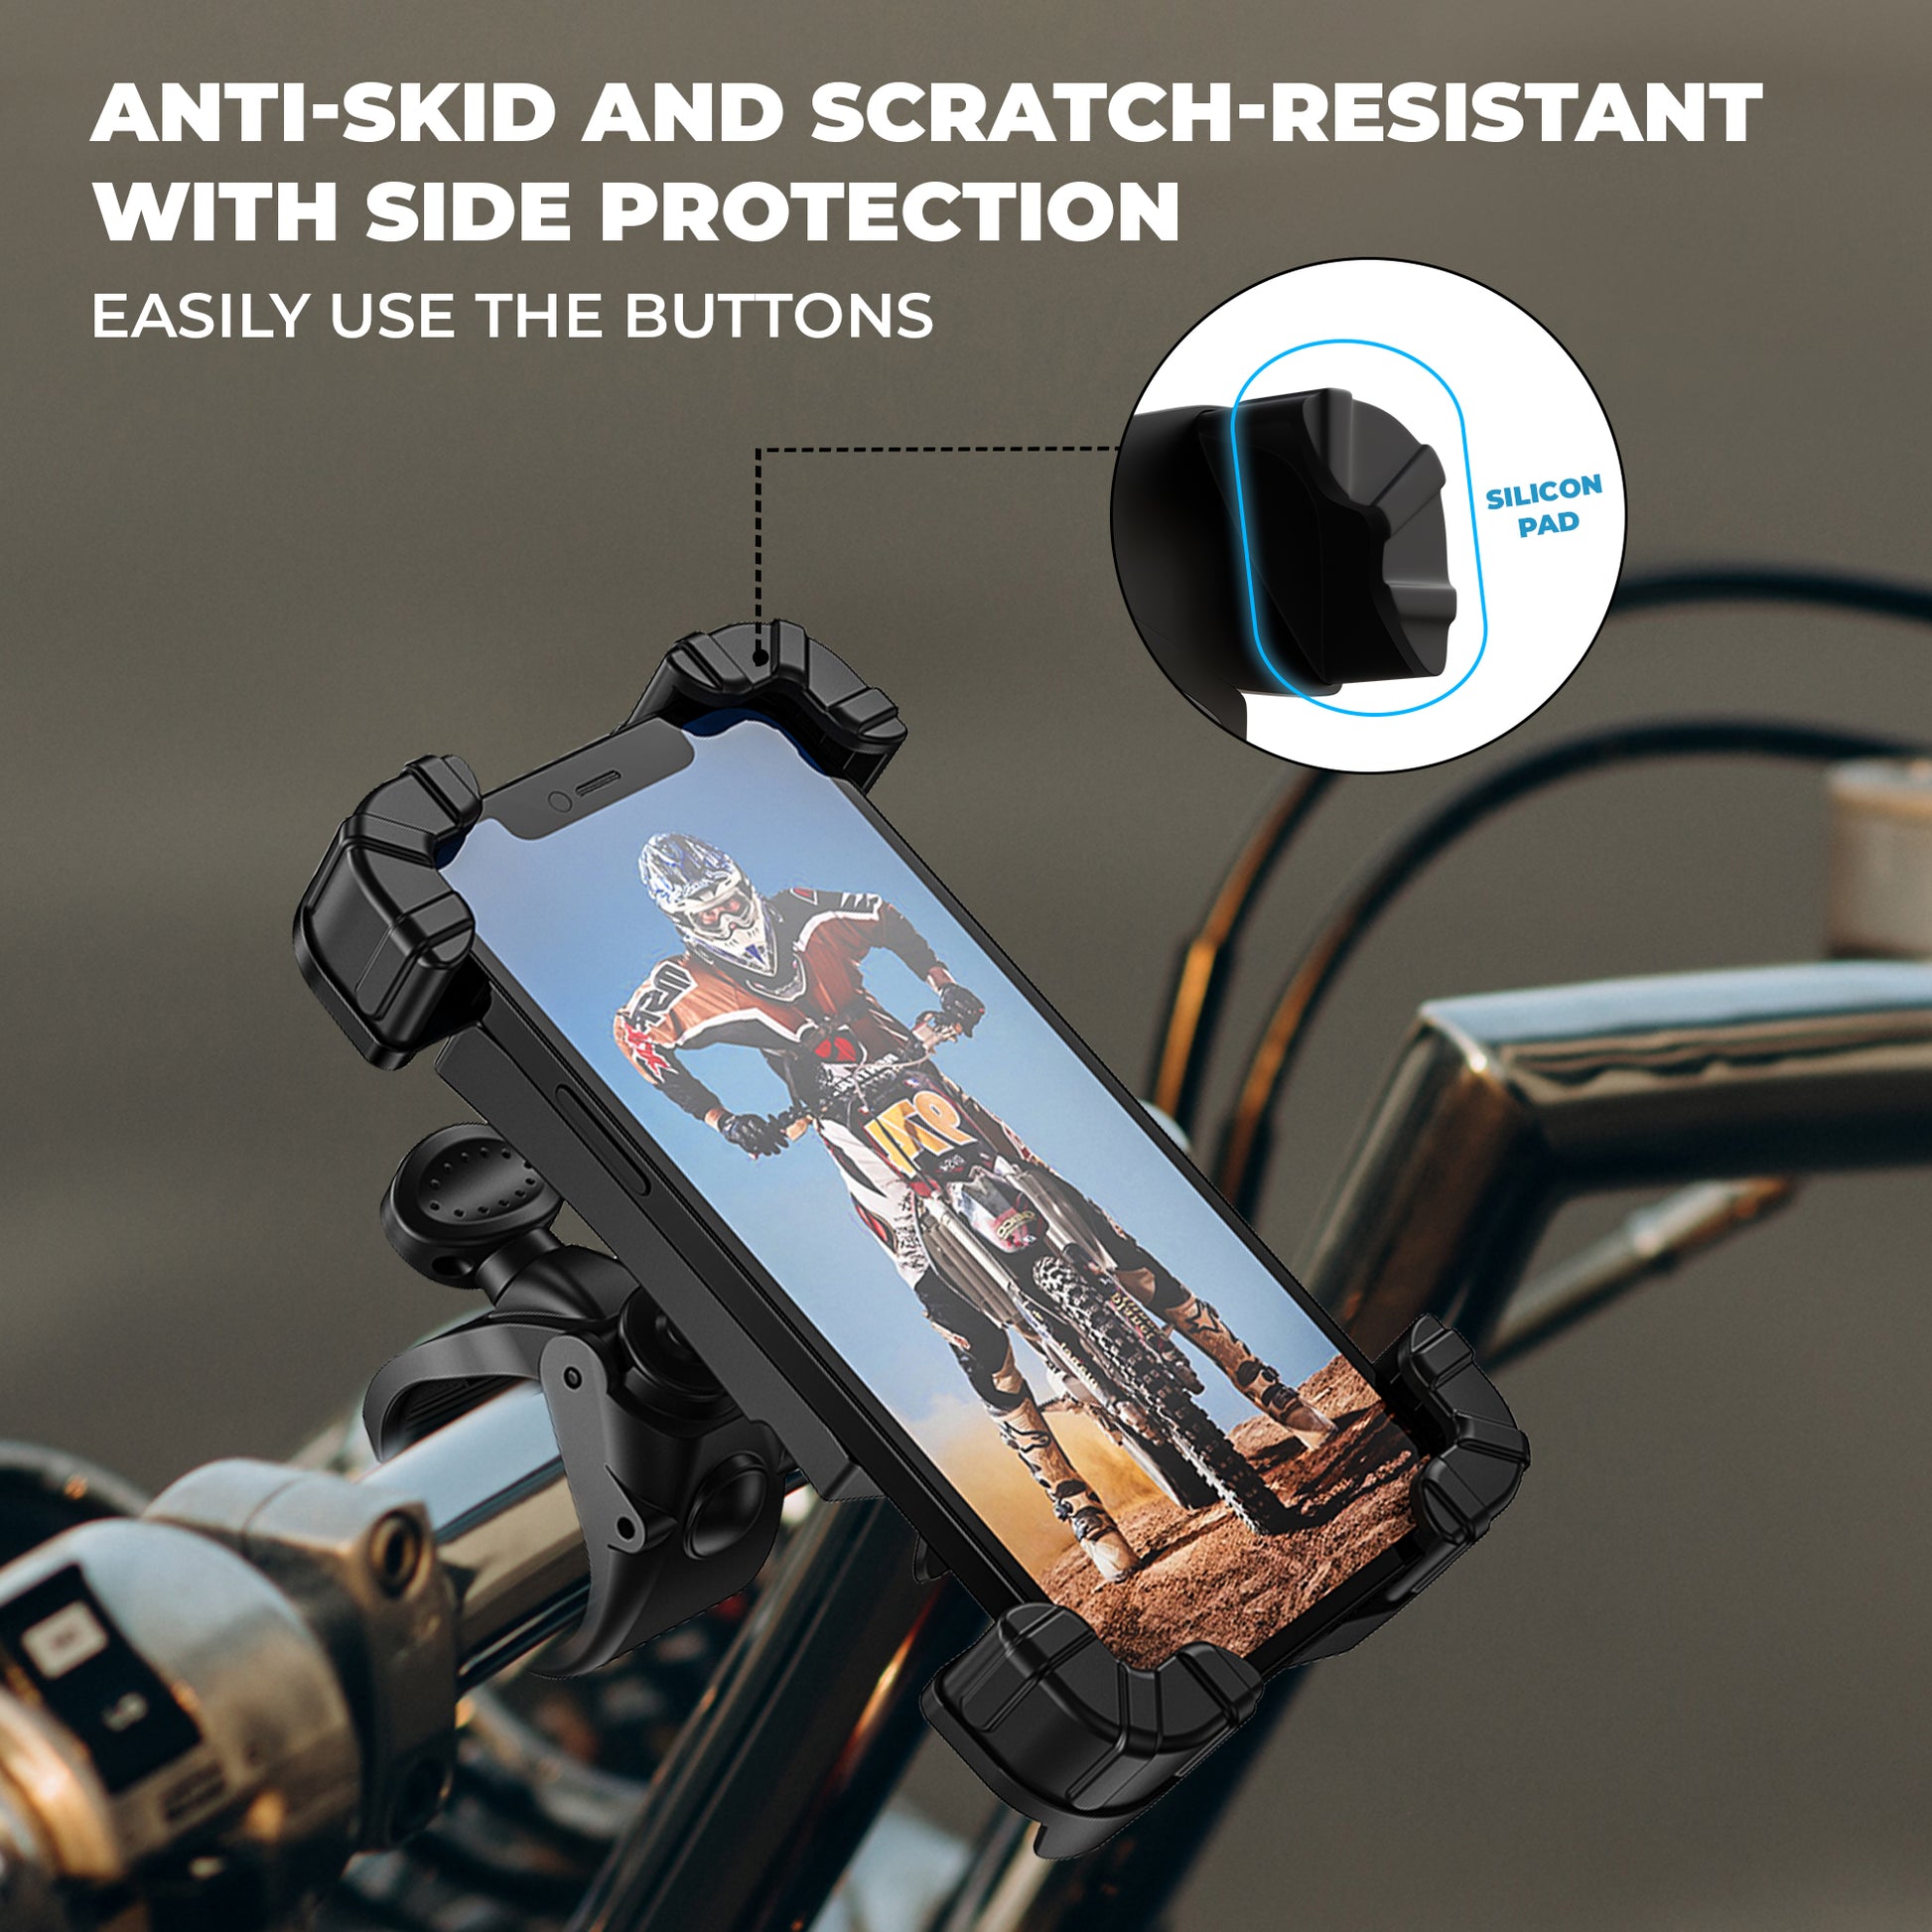 JCBL ACCESSORIES Bike Mobile Holder, High Stablized Design, Shock-Absorbing Silicone Pads, Strong Grip, Metallic Frame for 4.7 to 6.7 inch Mobiles (SL01) | ANTI-SKID AND SCRATCH-RESISTANT WITH SIDE PROTECTION EASILY USE THE BUTTONS 